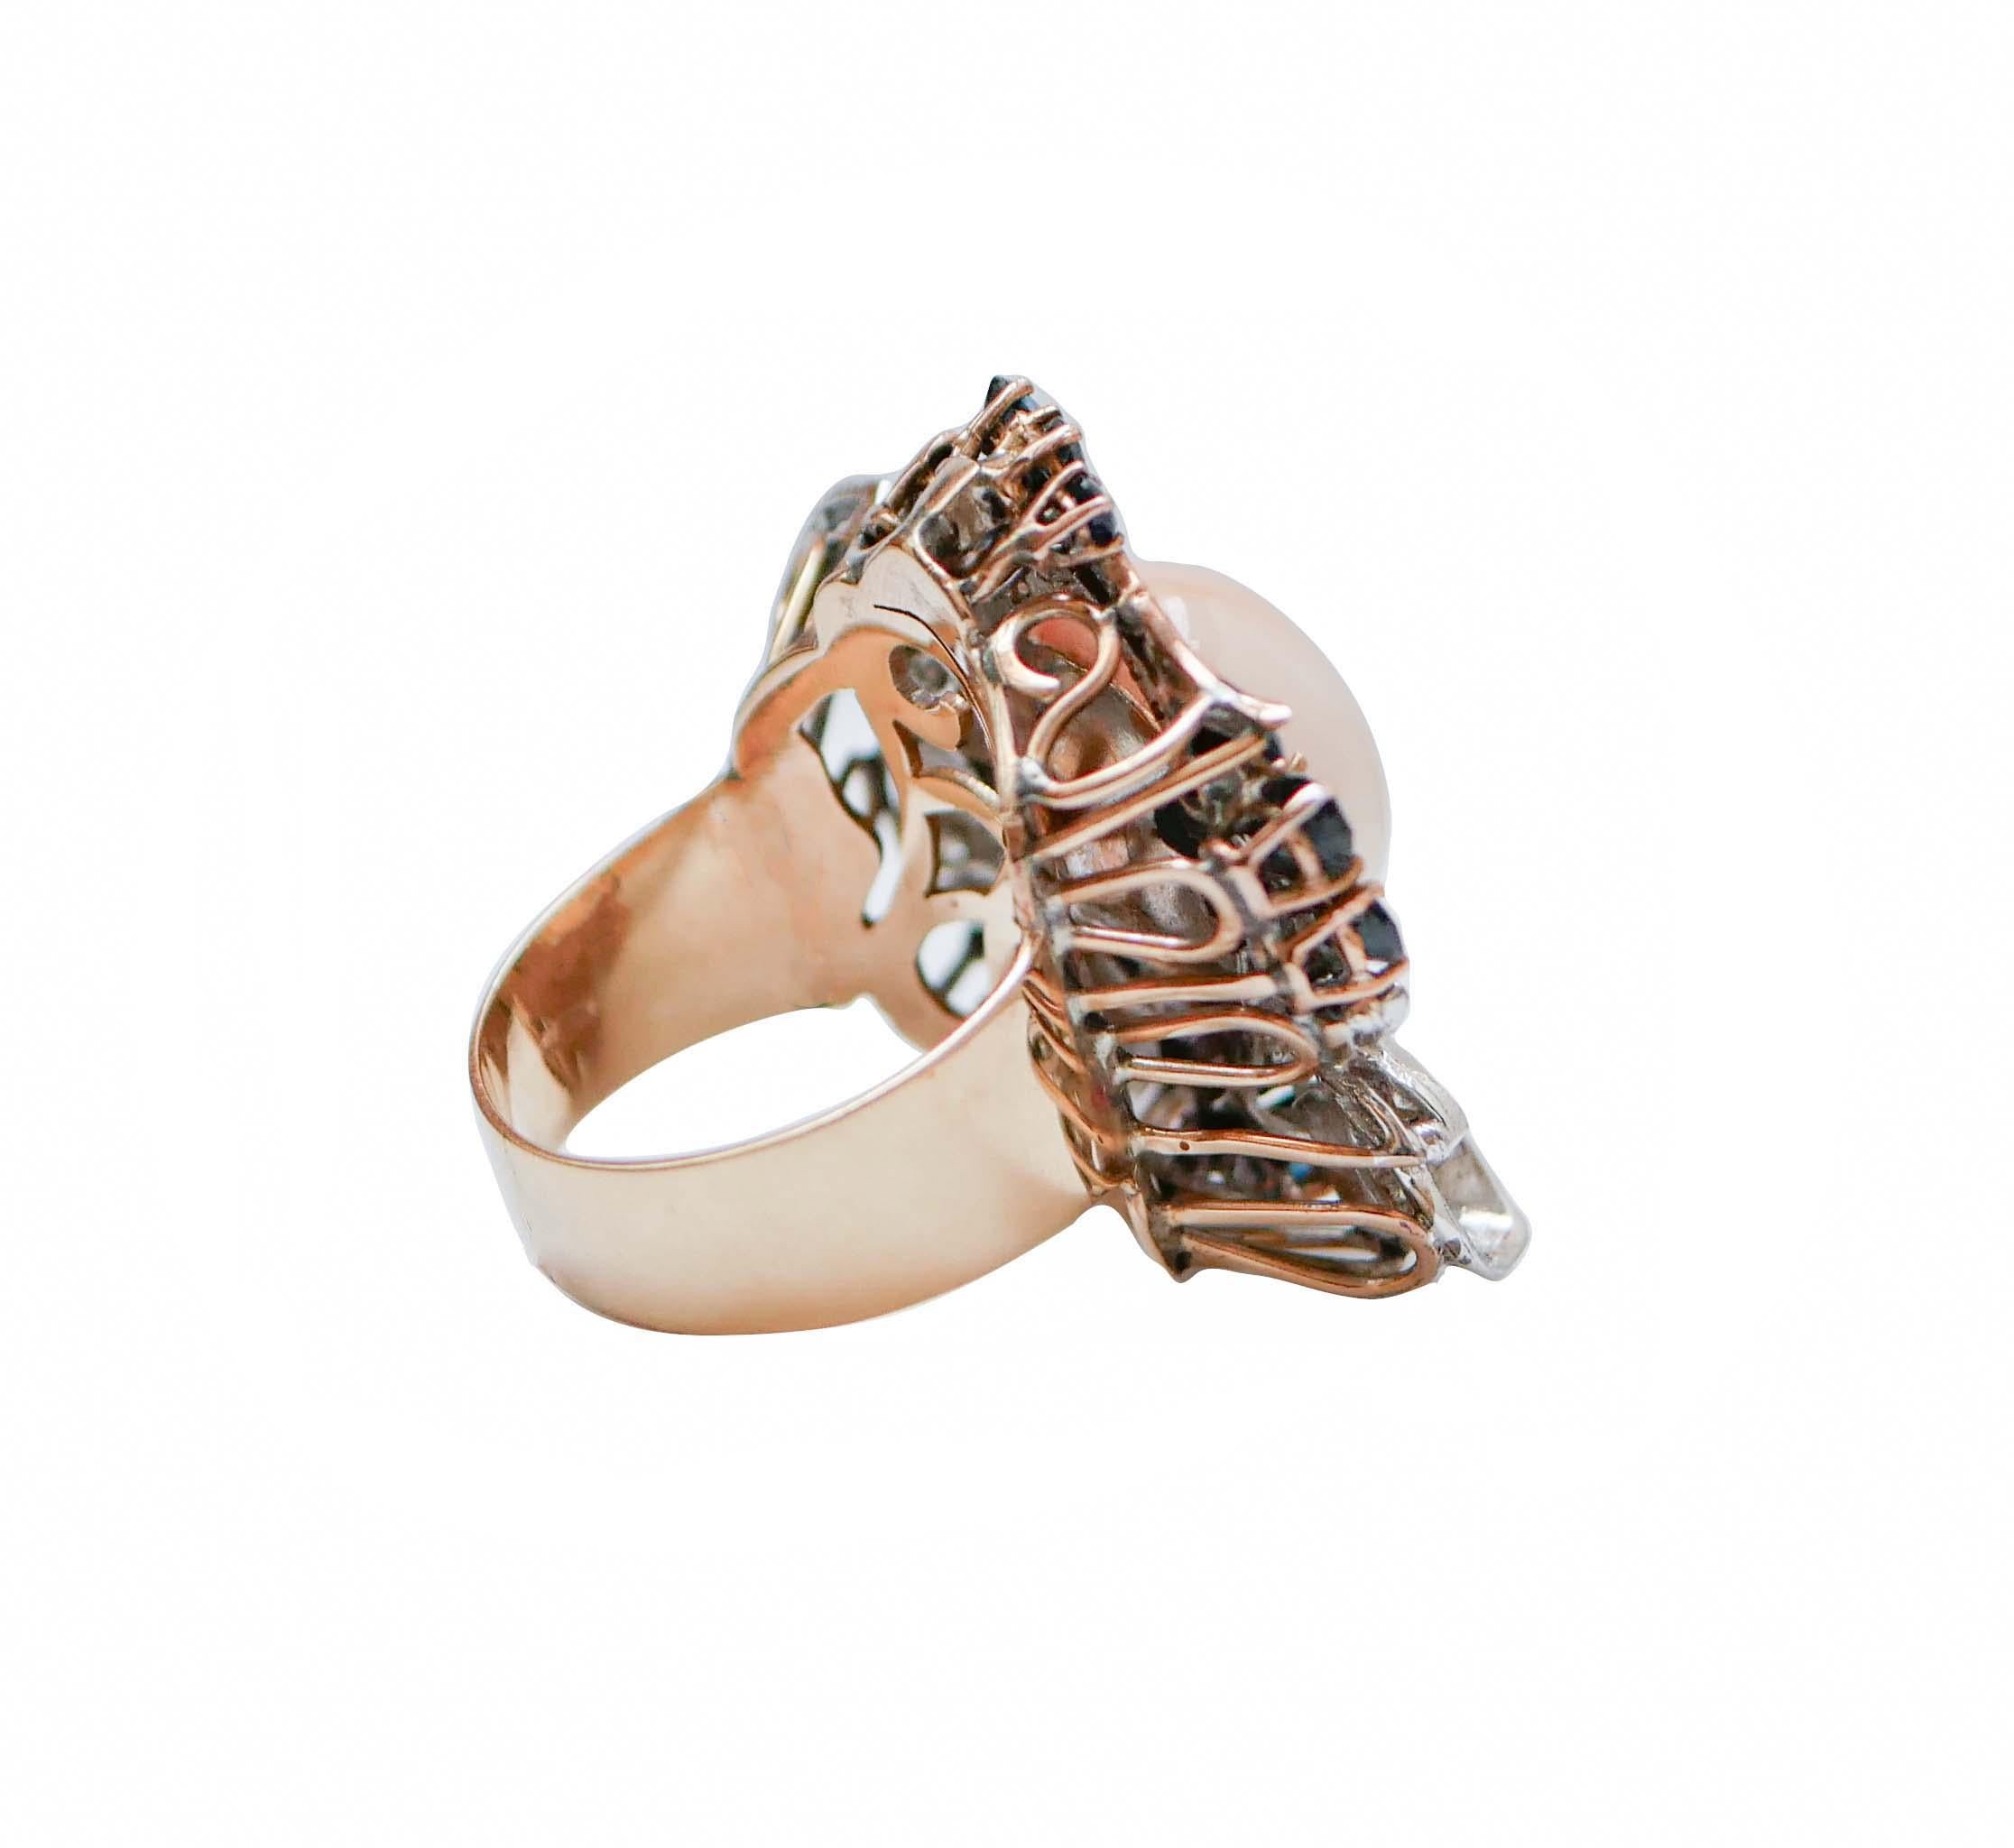 Retro Coral, Sapphires, Diamonds, 14 Karat Rose Gold and White Gold Ring. For Sale